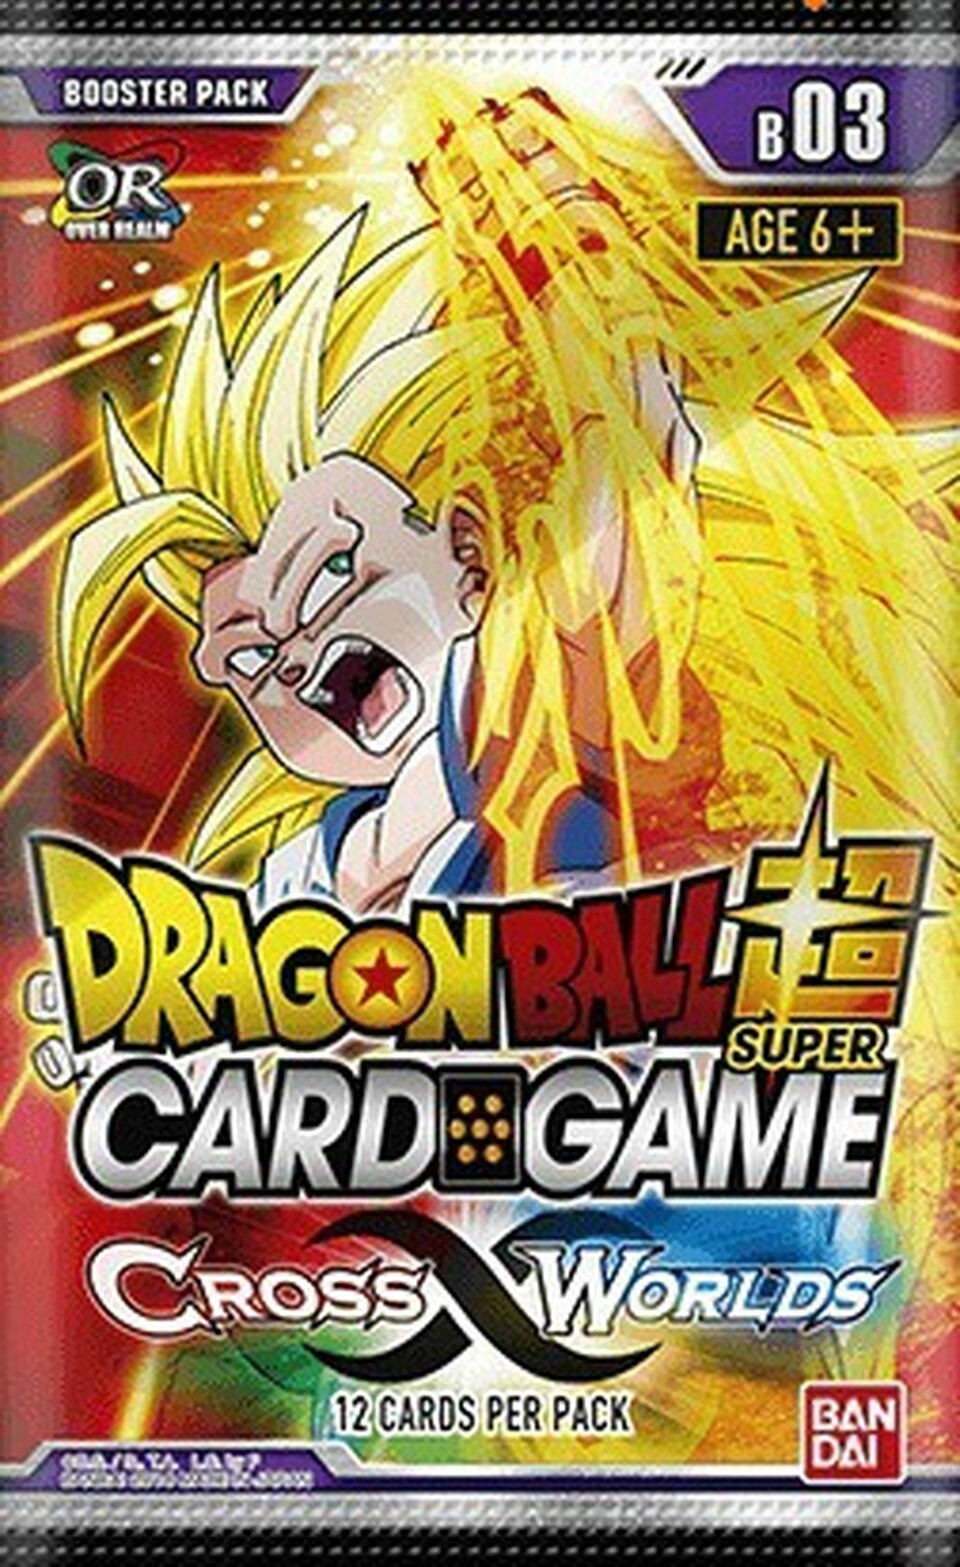 Series 3: Cross Worlds [DBS-B03] - Booster Pack | Total Play